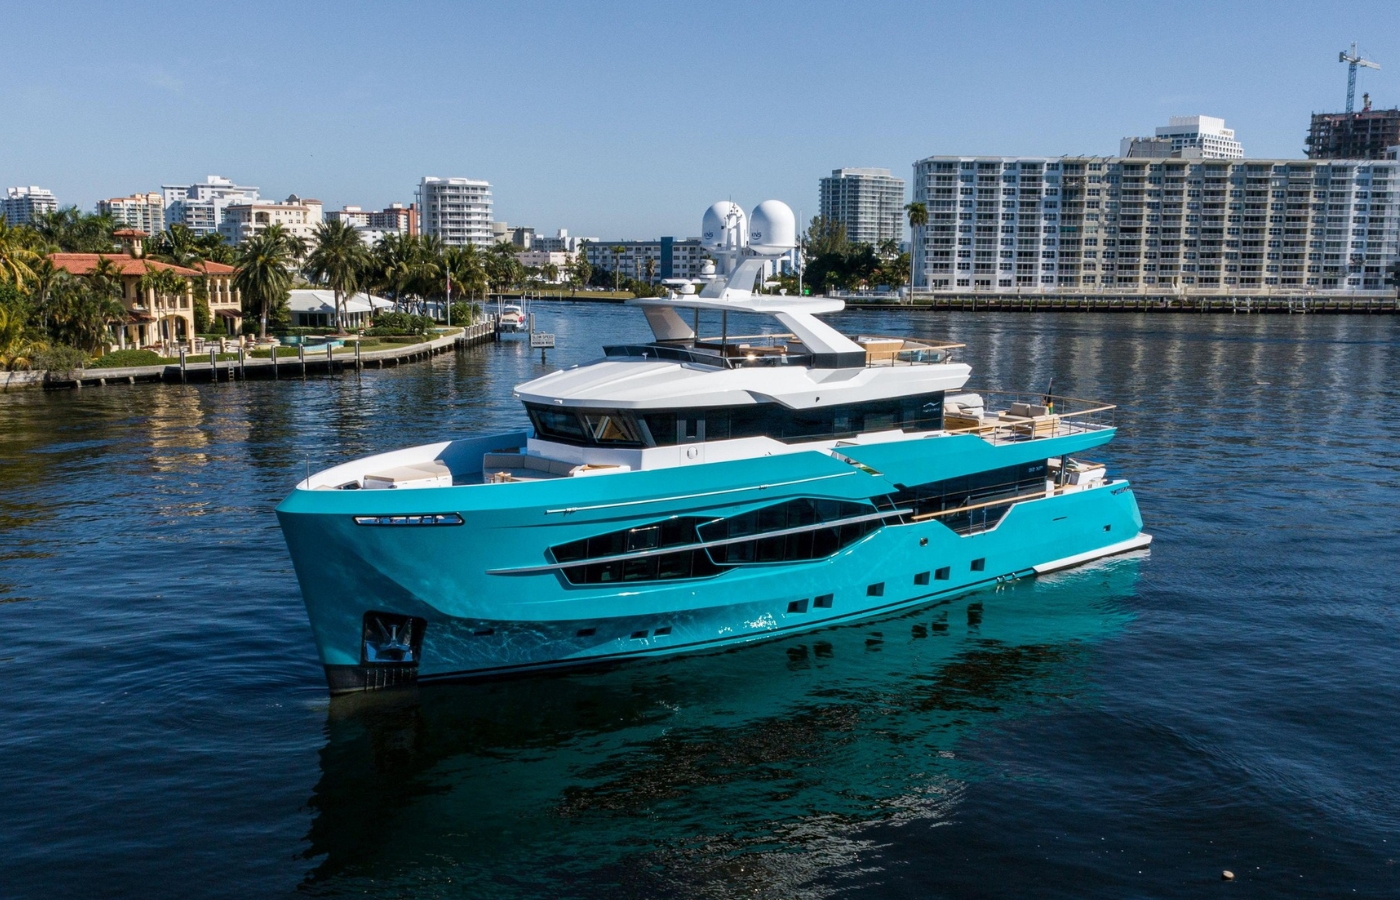 Someone Spent $12M on This Eye-Catching Turquoise Explorer With Matching Water Toys [In the News]